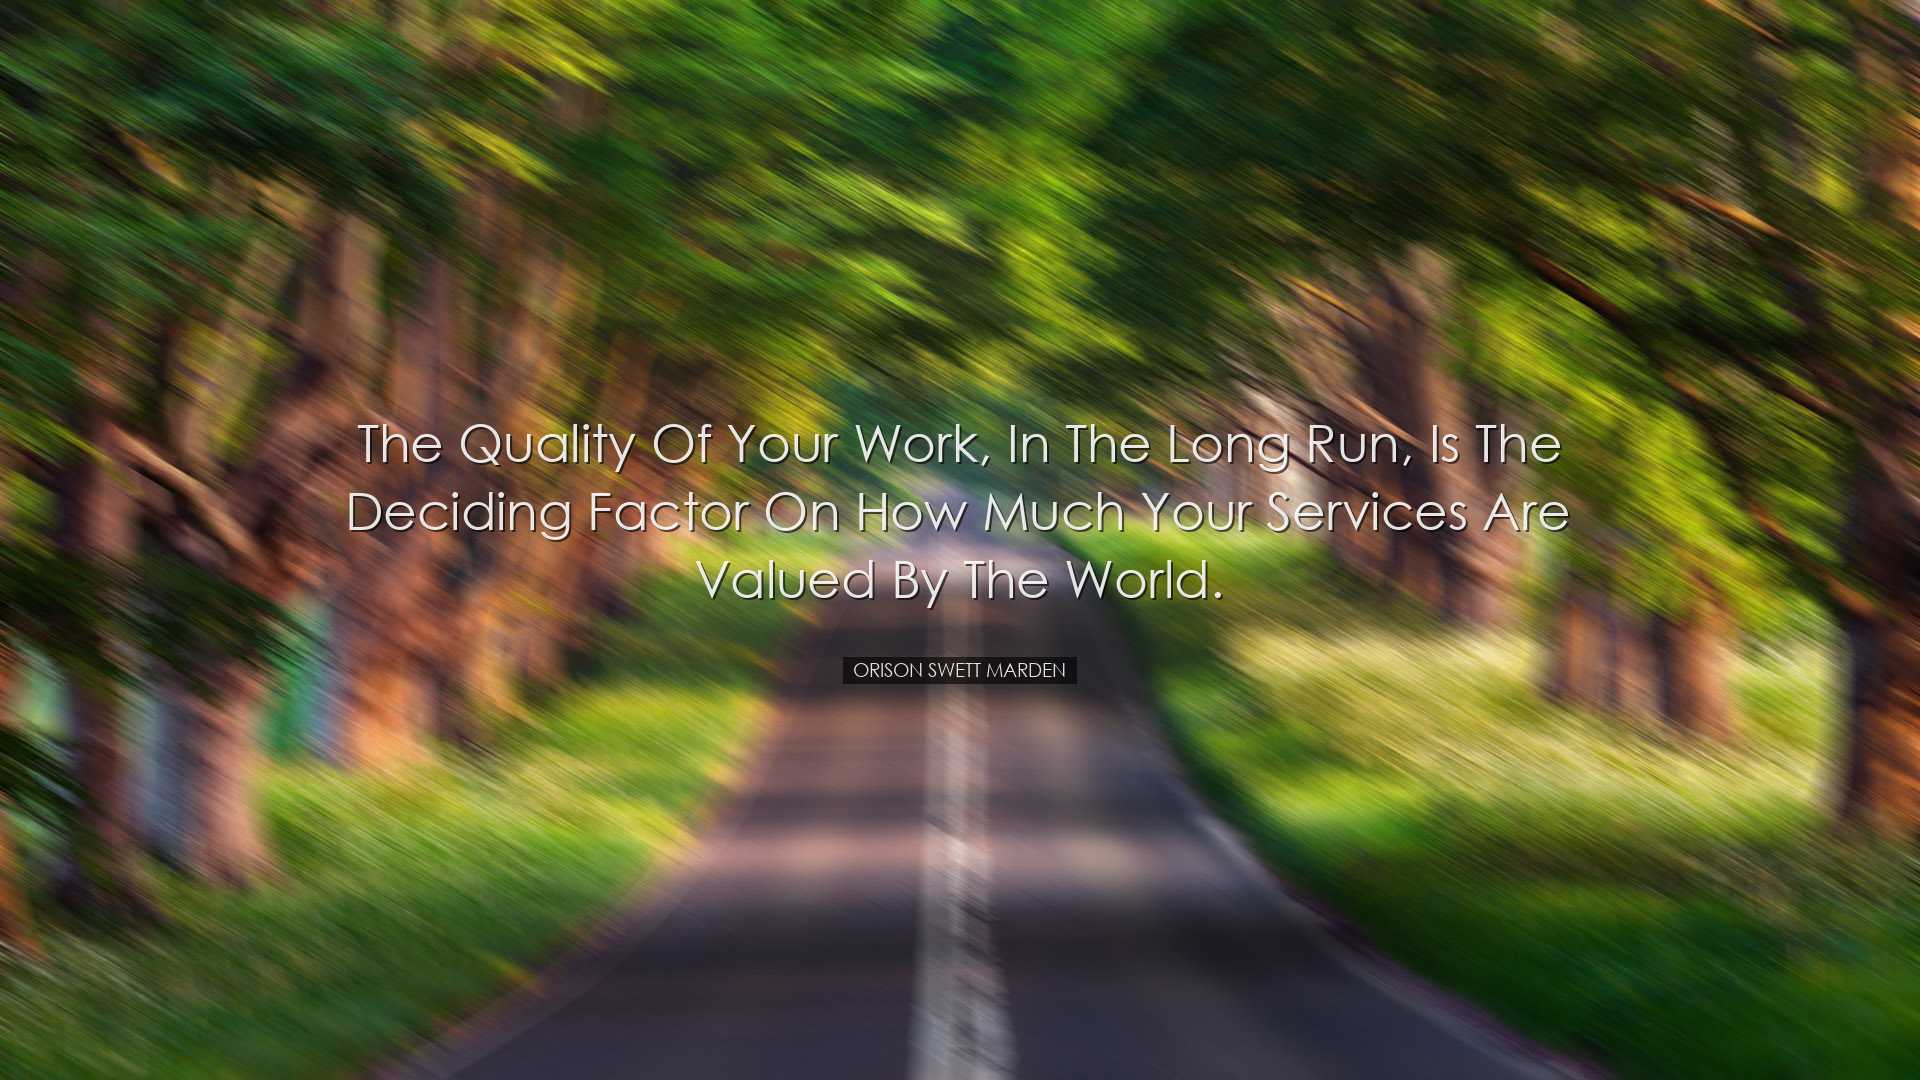 The quality of your work, in the long run, is the deciding factor